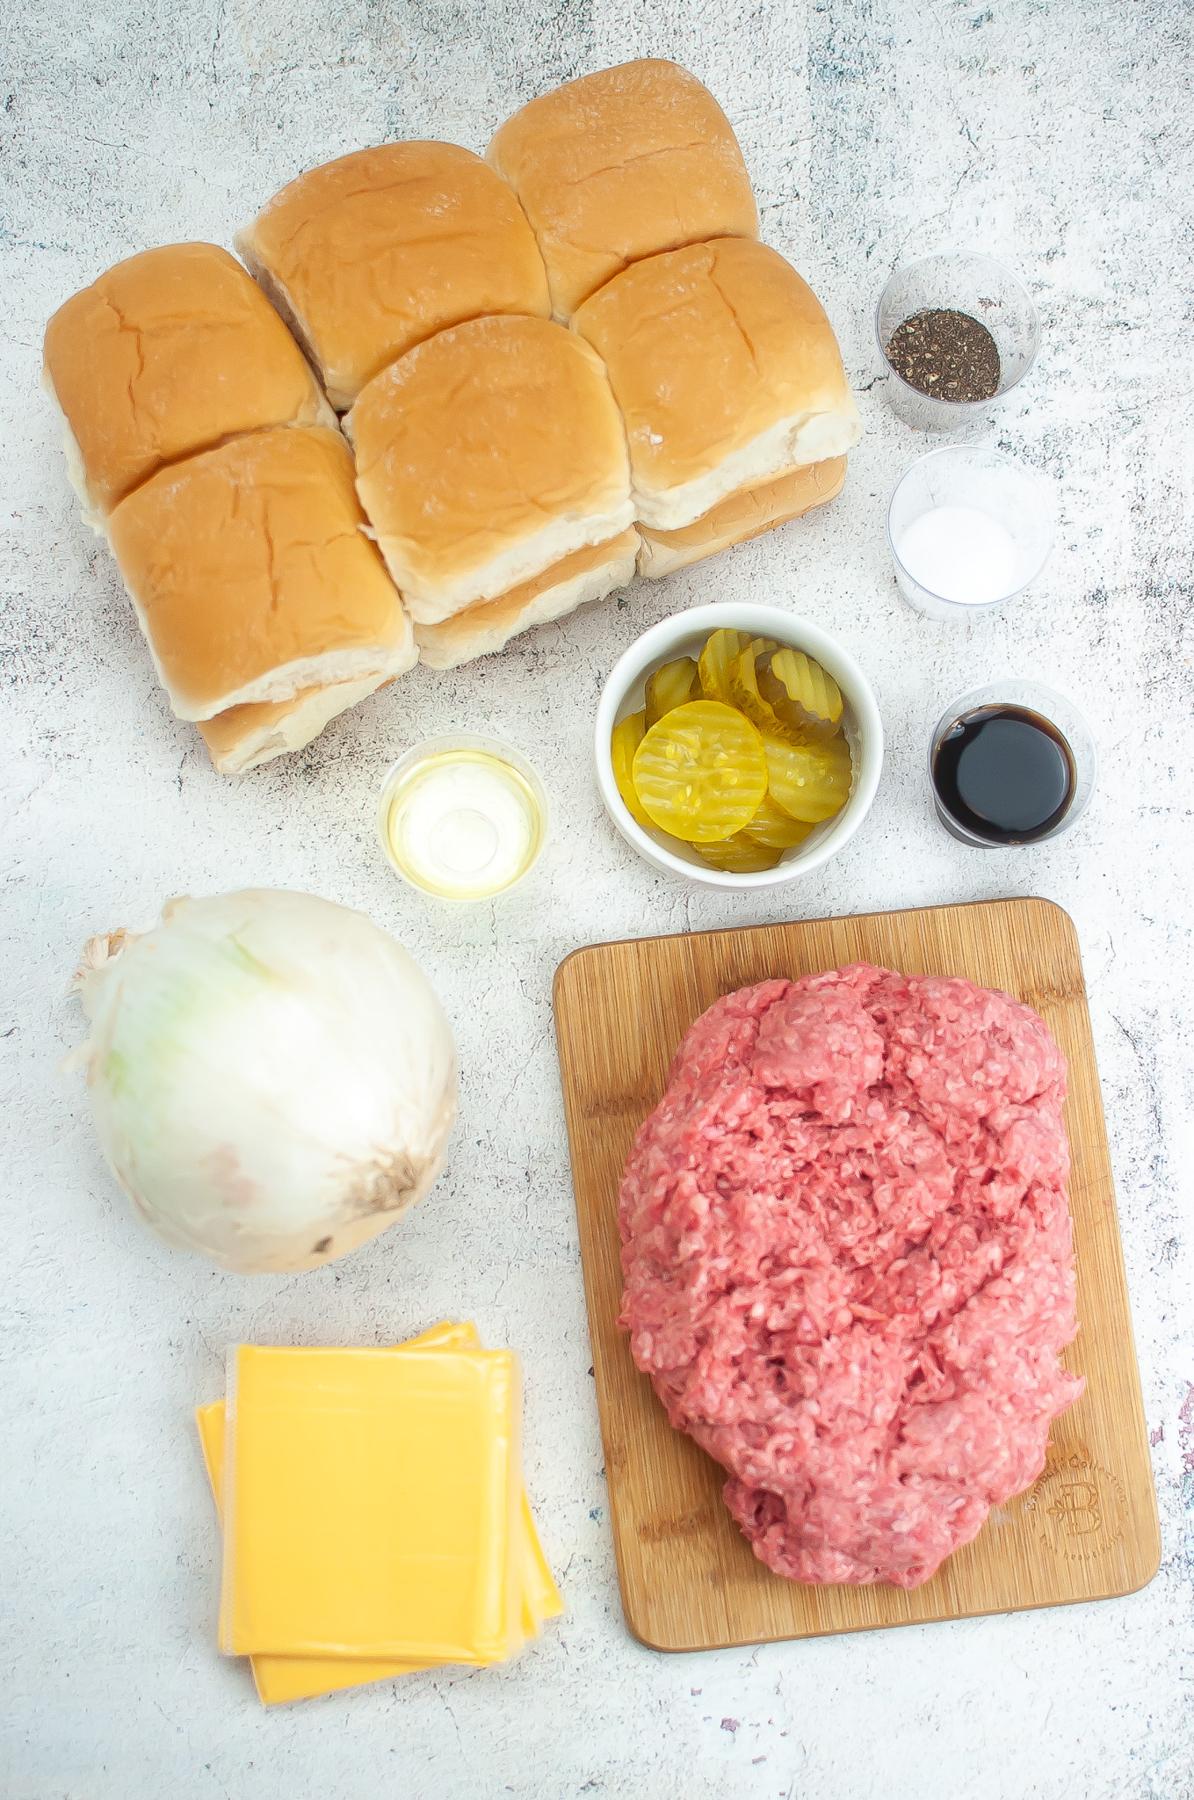 Ingredients for white castle burgers: slider buns, pepper, salt, Worcestershire sauce,  pickles, oil, ground beef, American cheese, and an onion.